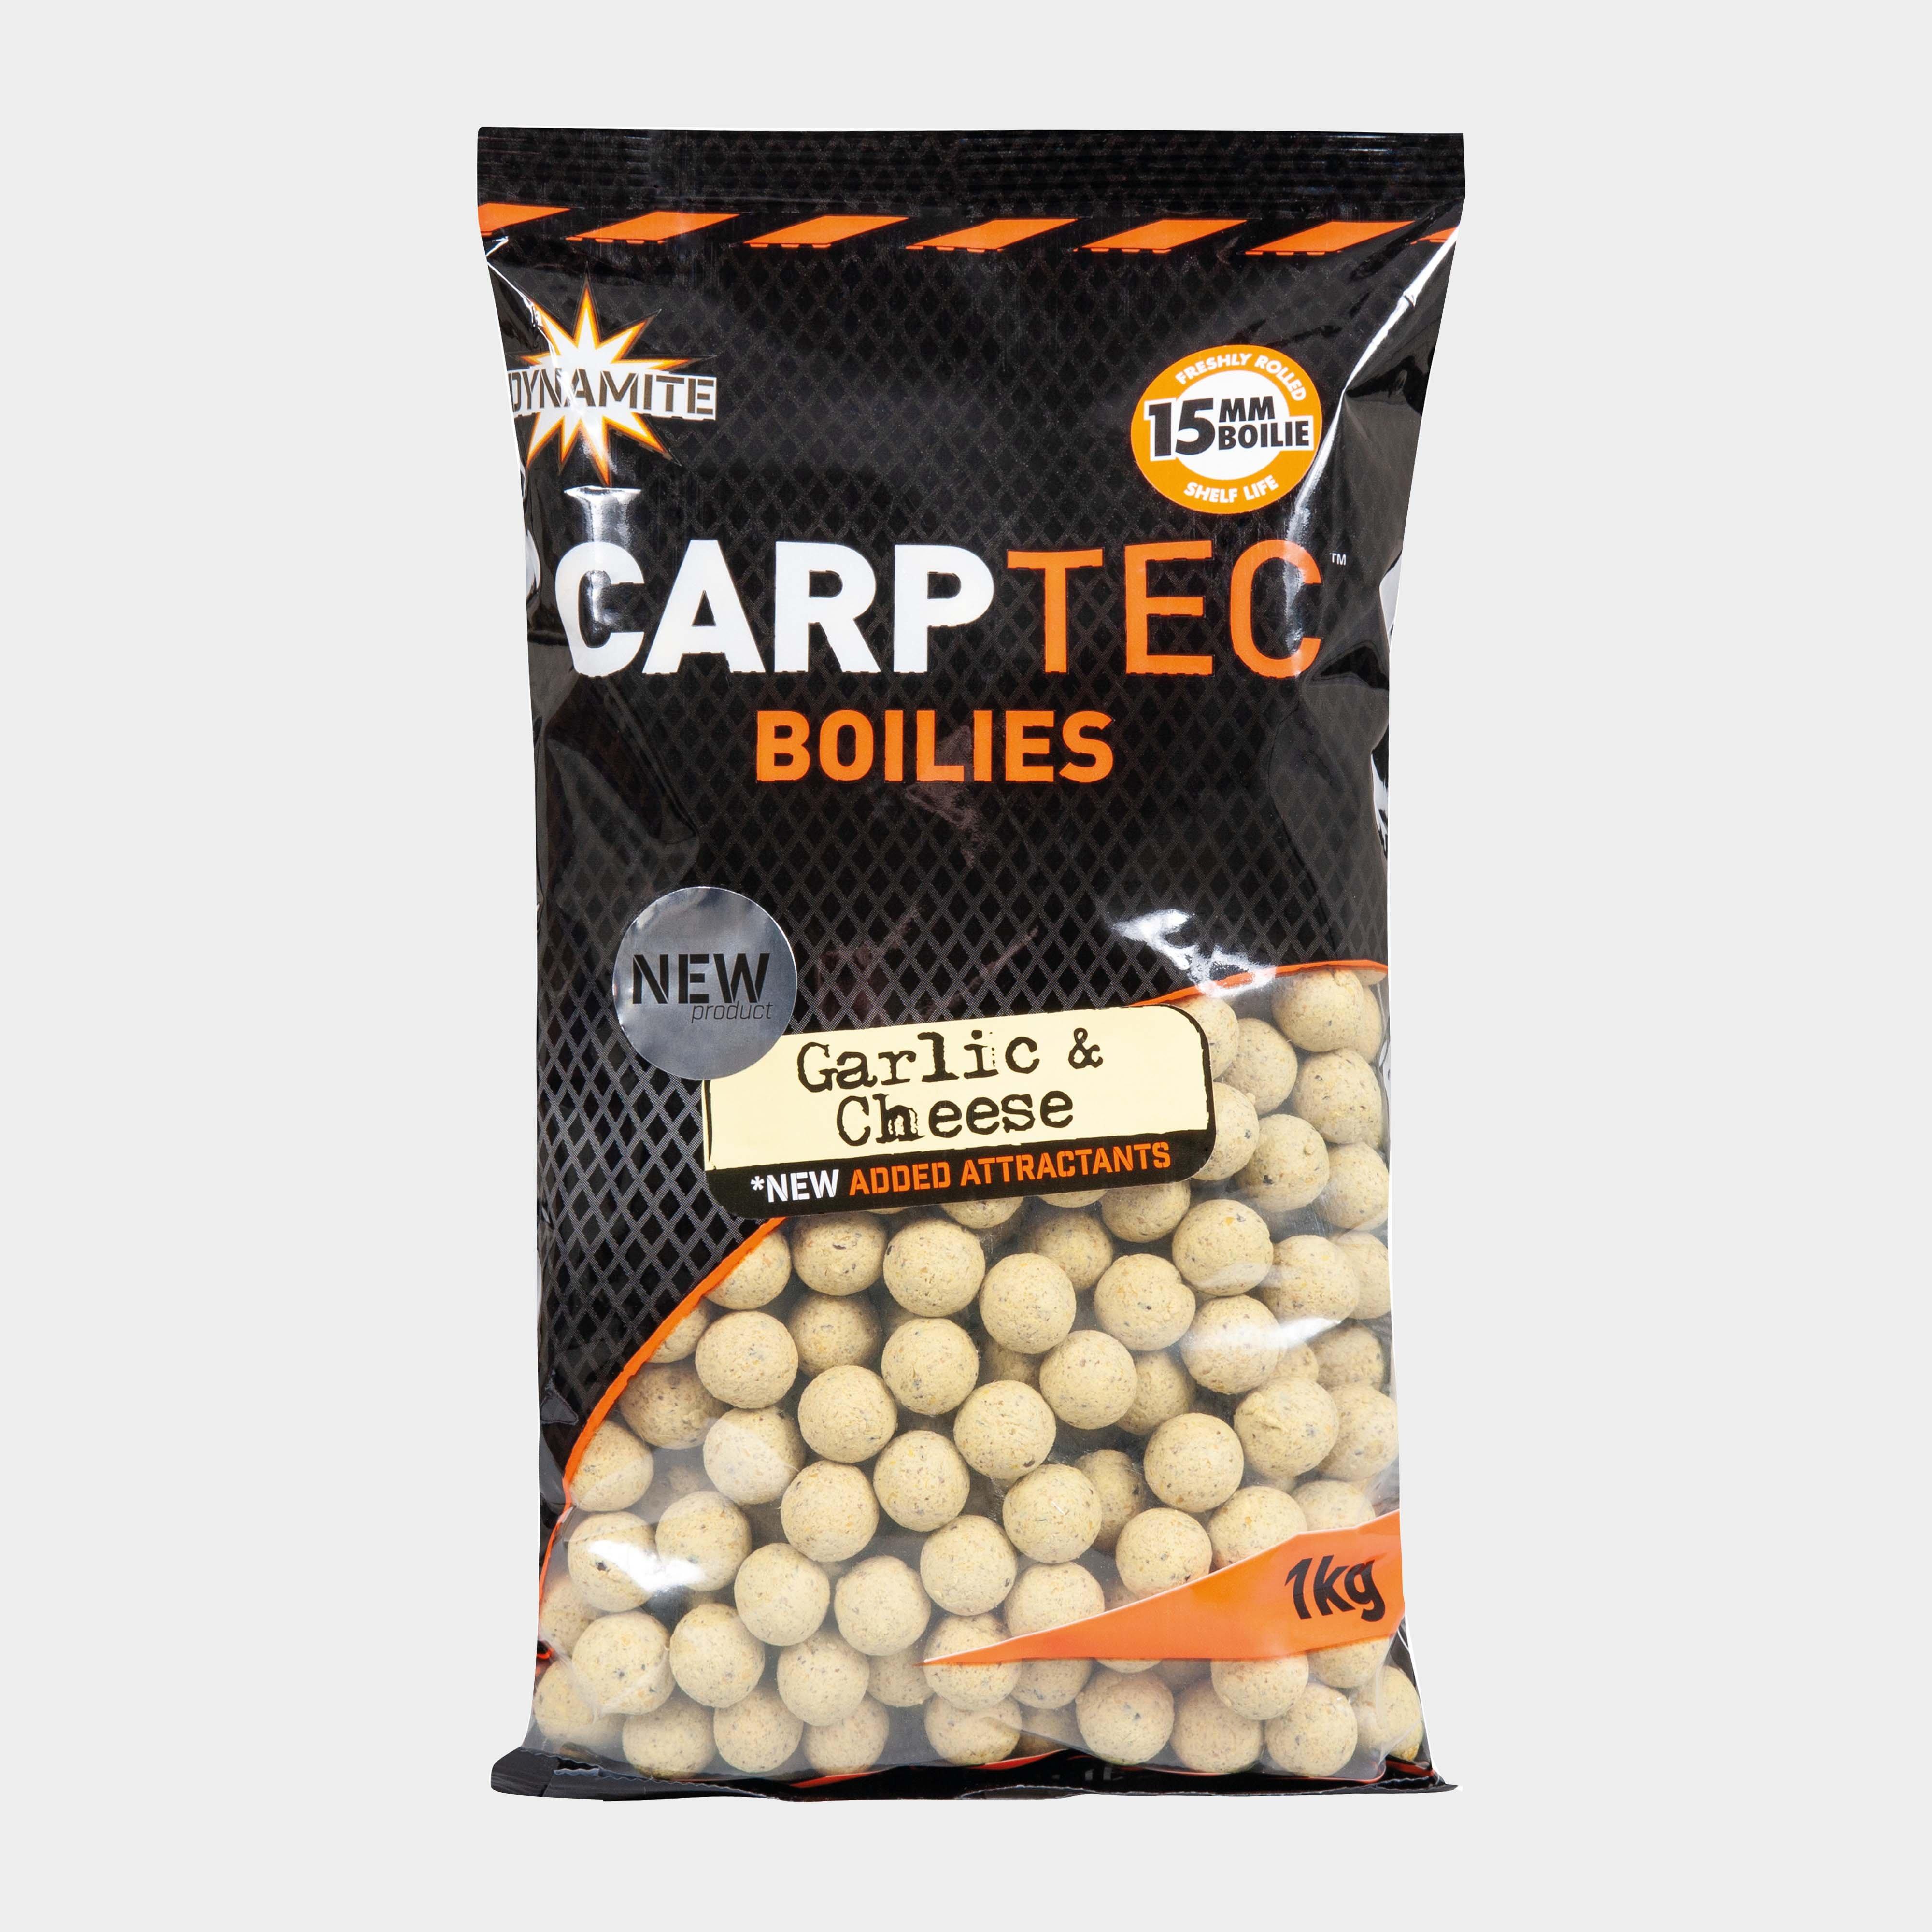 Dynamite Carptec Garlic And Cheese Boilies (15mm)  Yellow